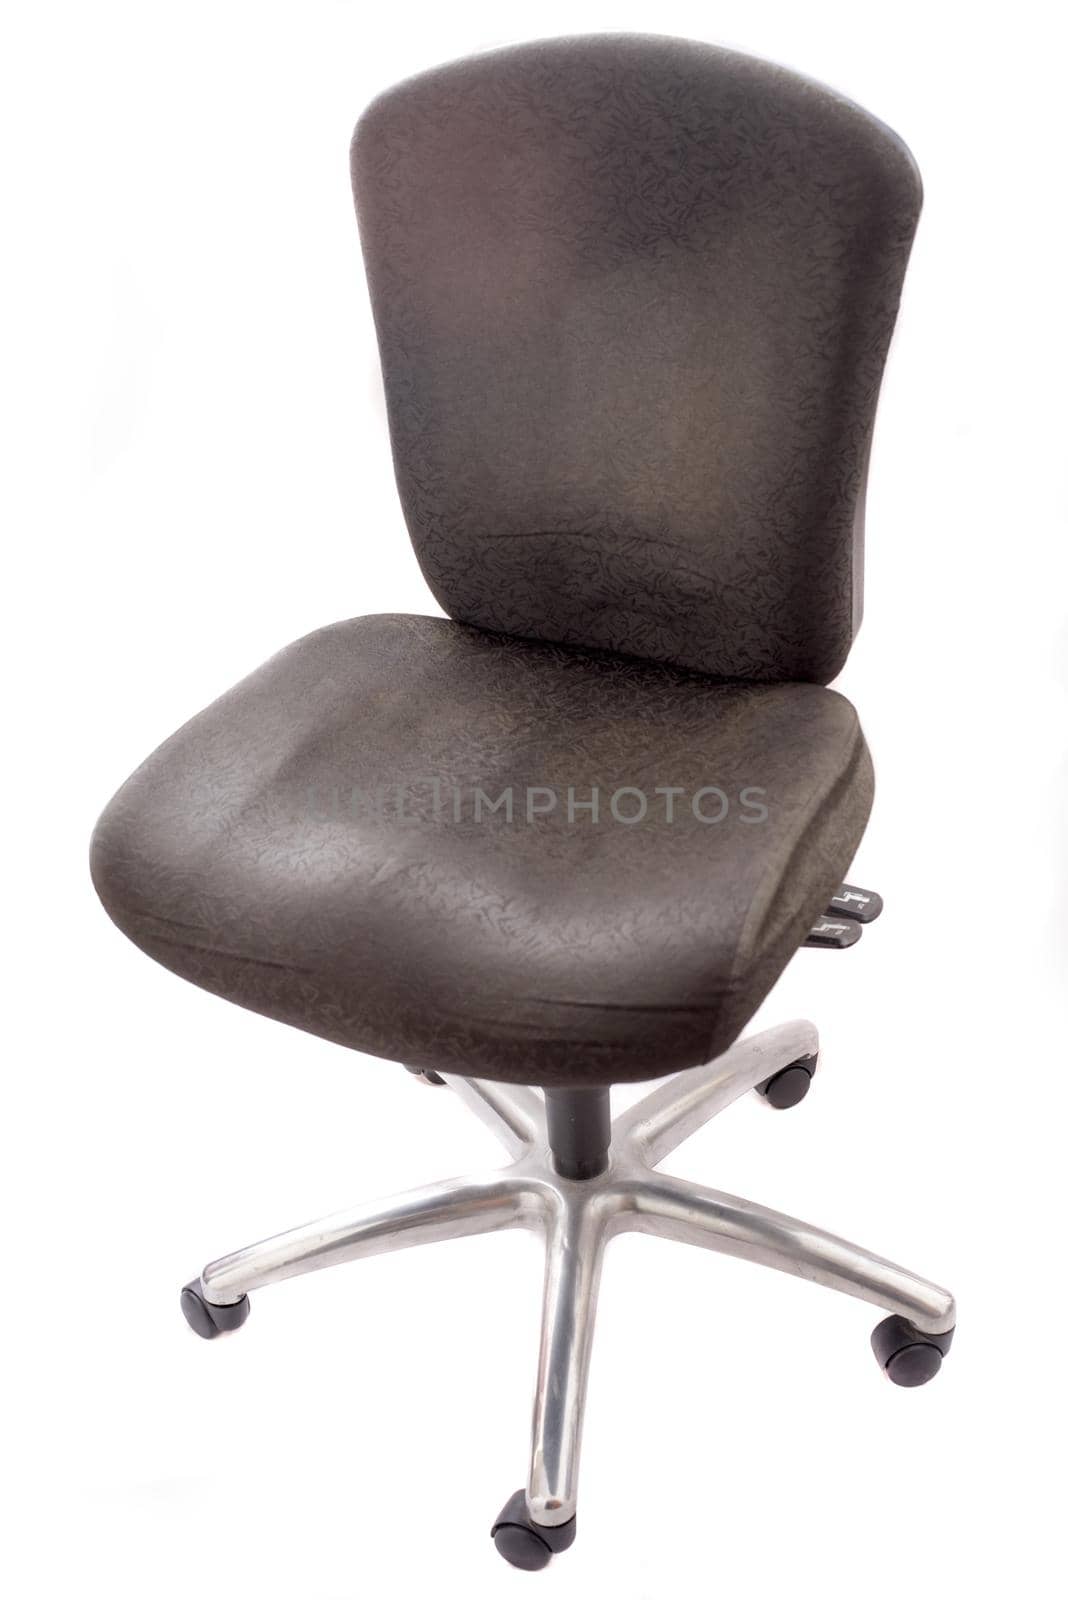 Isolated single armless adjustable brown swivel chair with caster feet over white background